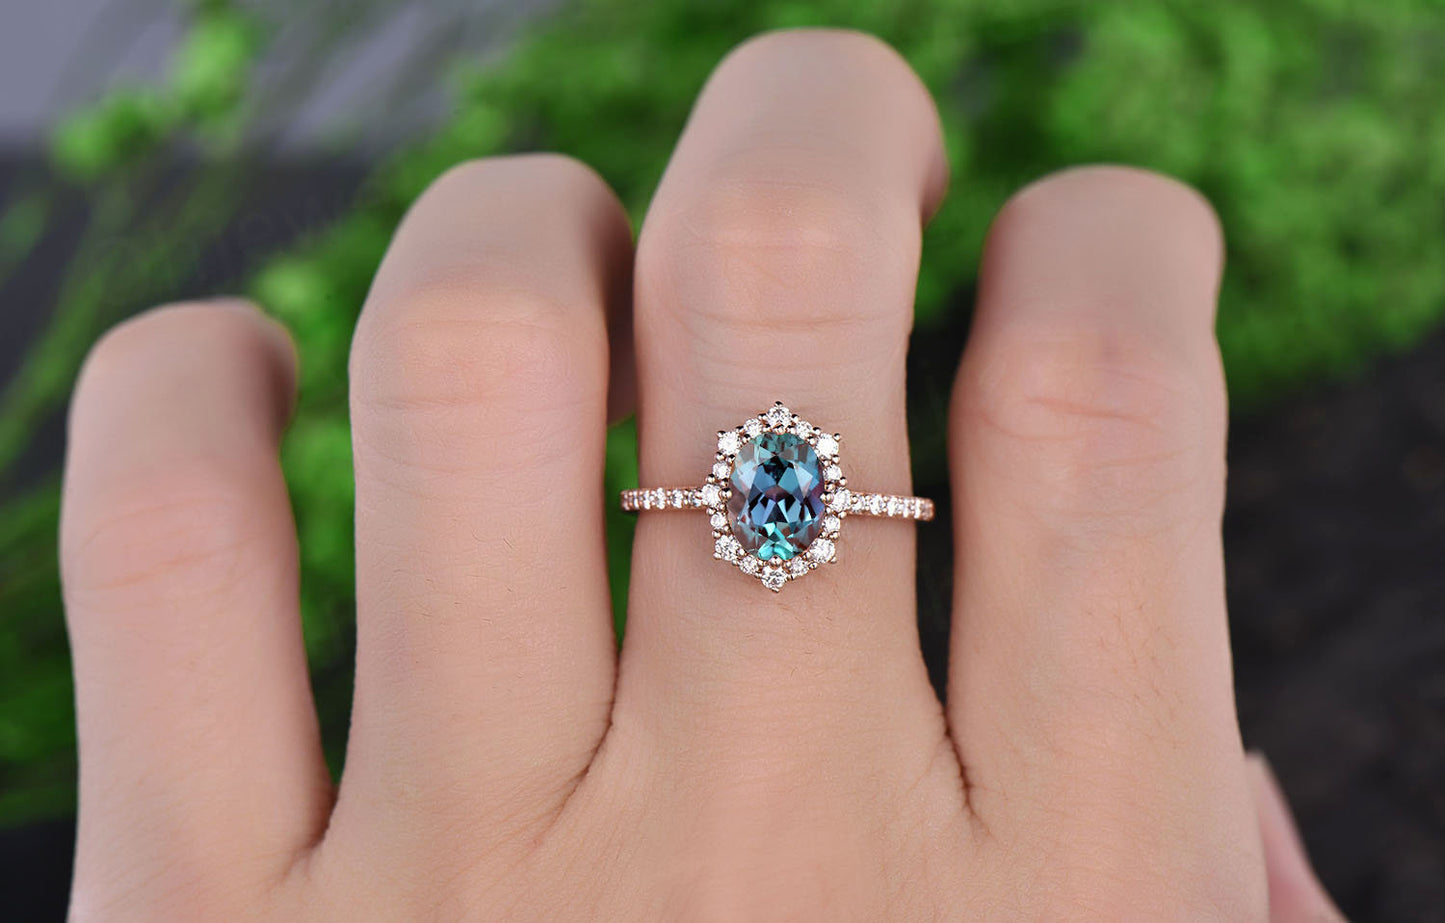 Vintage unique moissanite engagement ring oval cut alexandrite engagement ring white gold birthday wedding anniversary gift antique jewelry